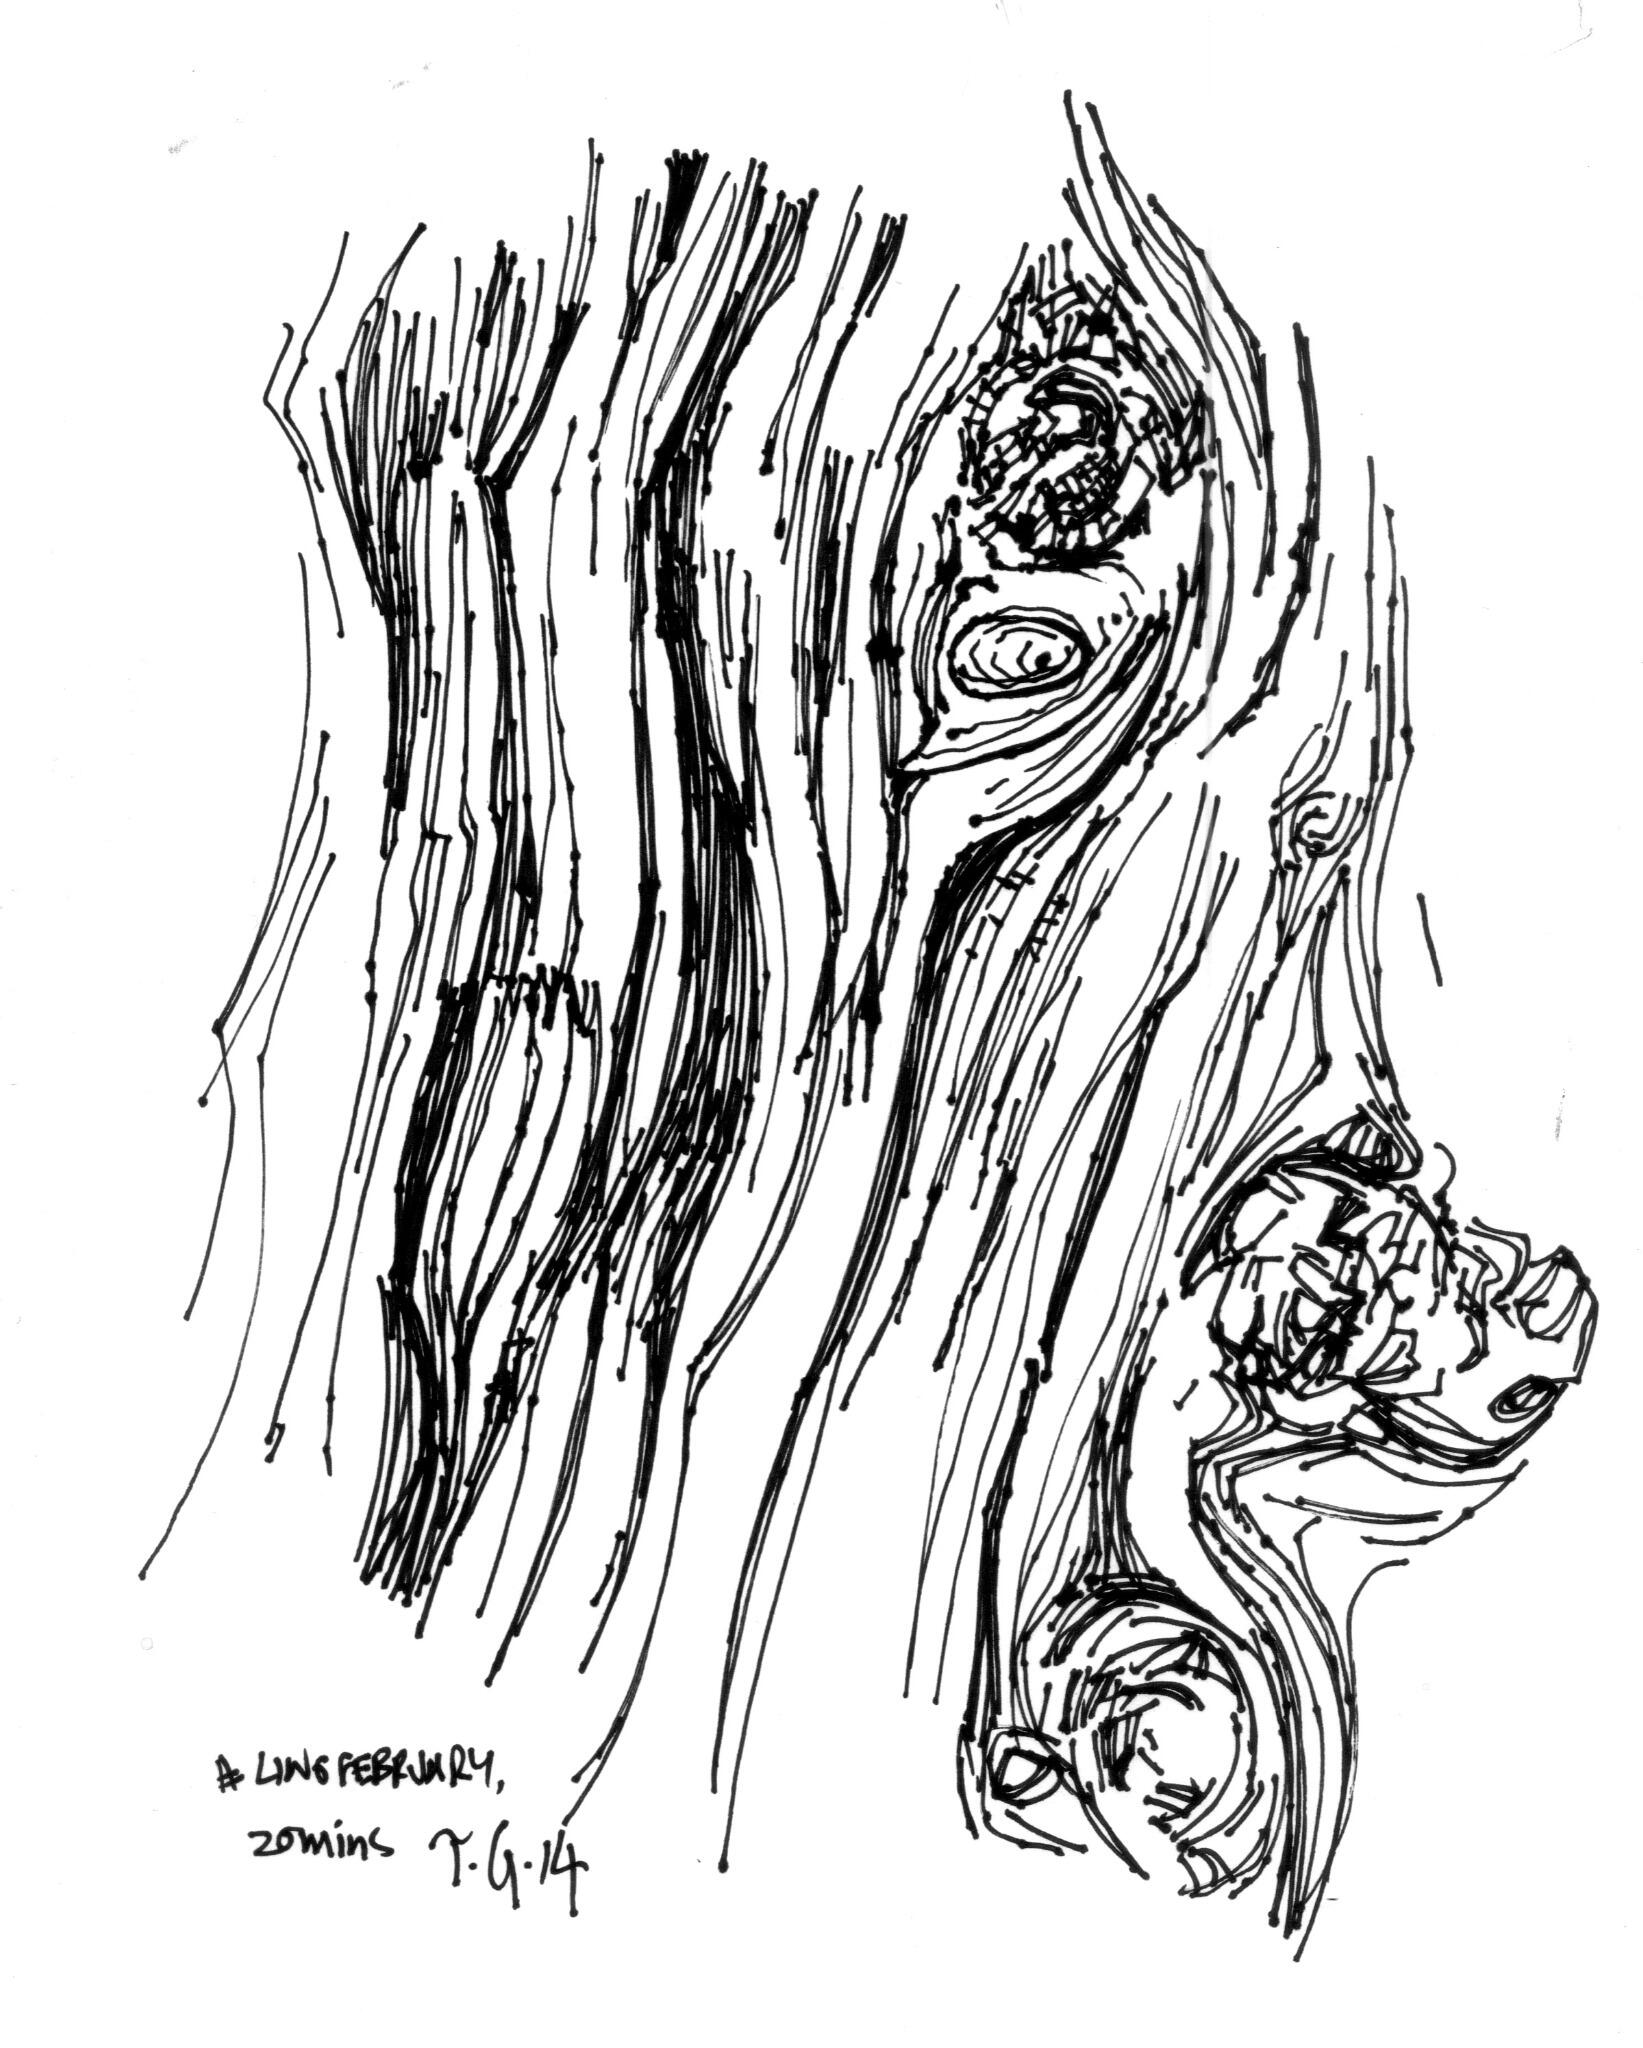 Anthony Greentree on X: #linefebruary #thedailysketch 20 min ink sketch of  some tree bark. 27/2/14  / X